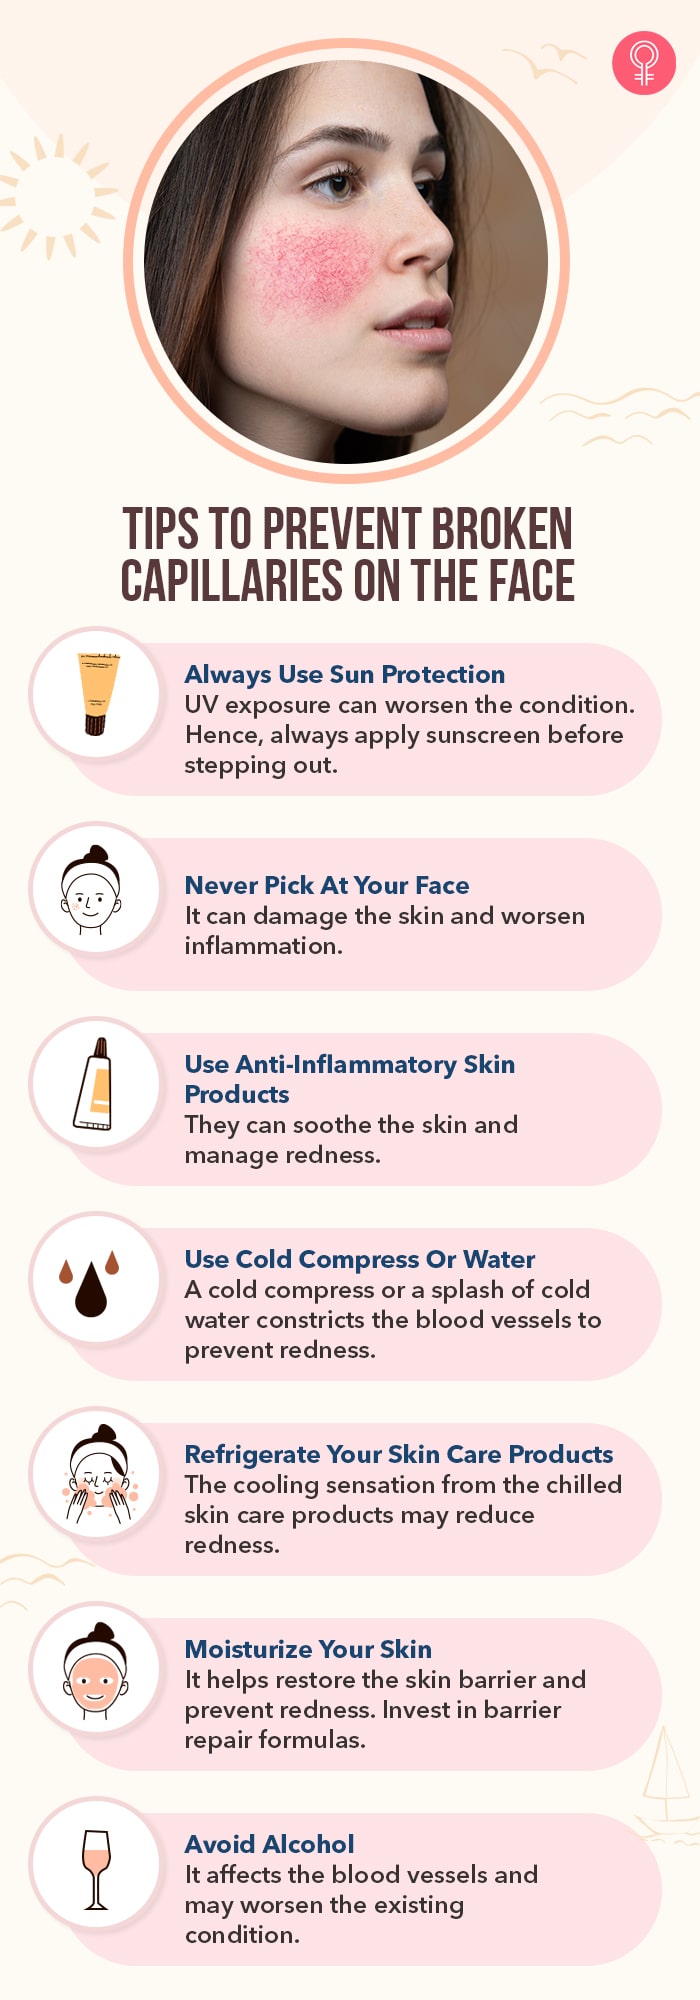 7 amazing tips to prevent broken capillaries on the face [infographic]